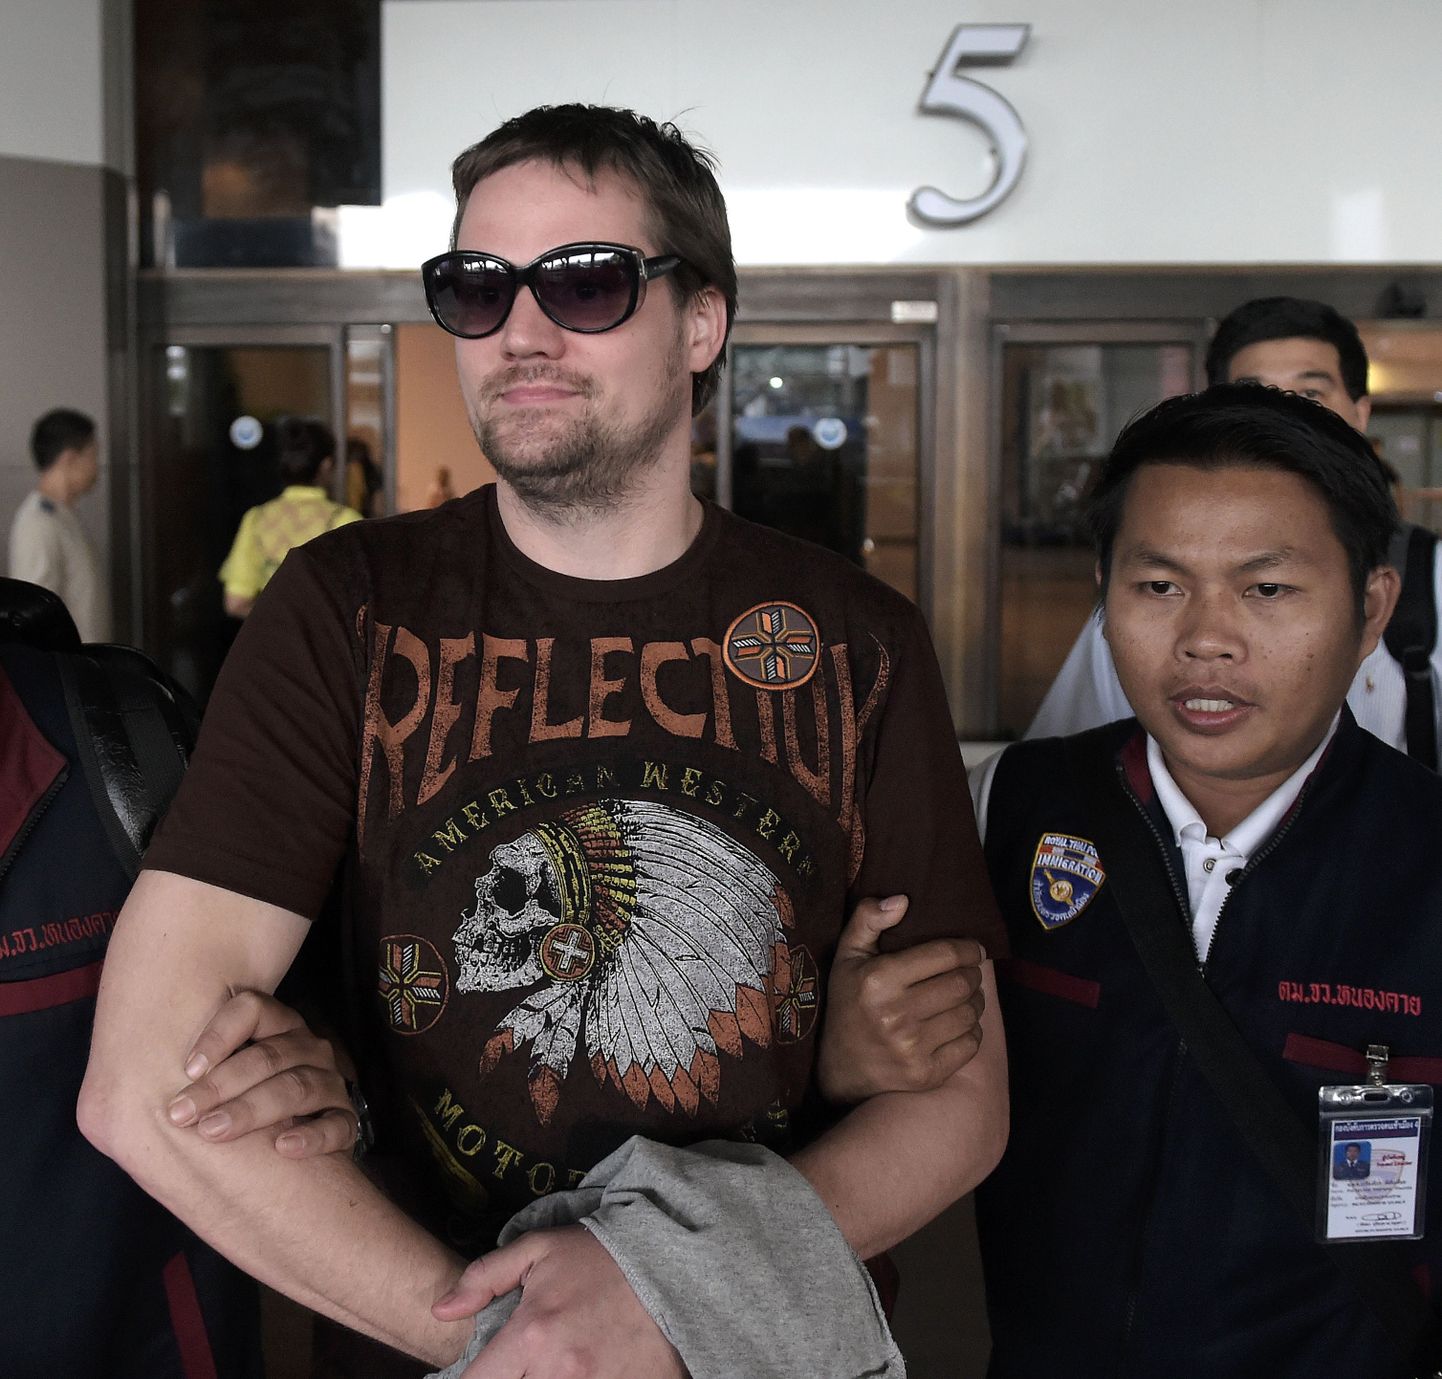 Swedish co-founder of the Pirate Bay website Fredrik Neij (L), 36, is taken by Thai immigration police officers at Don Mueang airport, to an immigration detention centre in Bangkok on November 5, 2013. The Swedish co-founder of the Pirate Bay website is due to be hauled to Bangkok following his arrest in northeast Thailand, with police from Stockholm waiting to press for his deportation to serve a jail term for copyright infringement. AFP PHOTO/ Nicolas ASFOURI